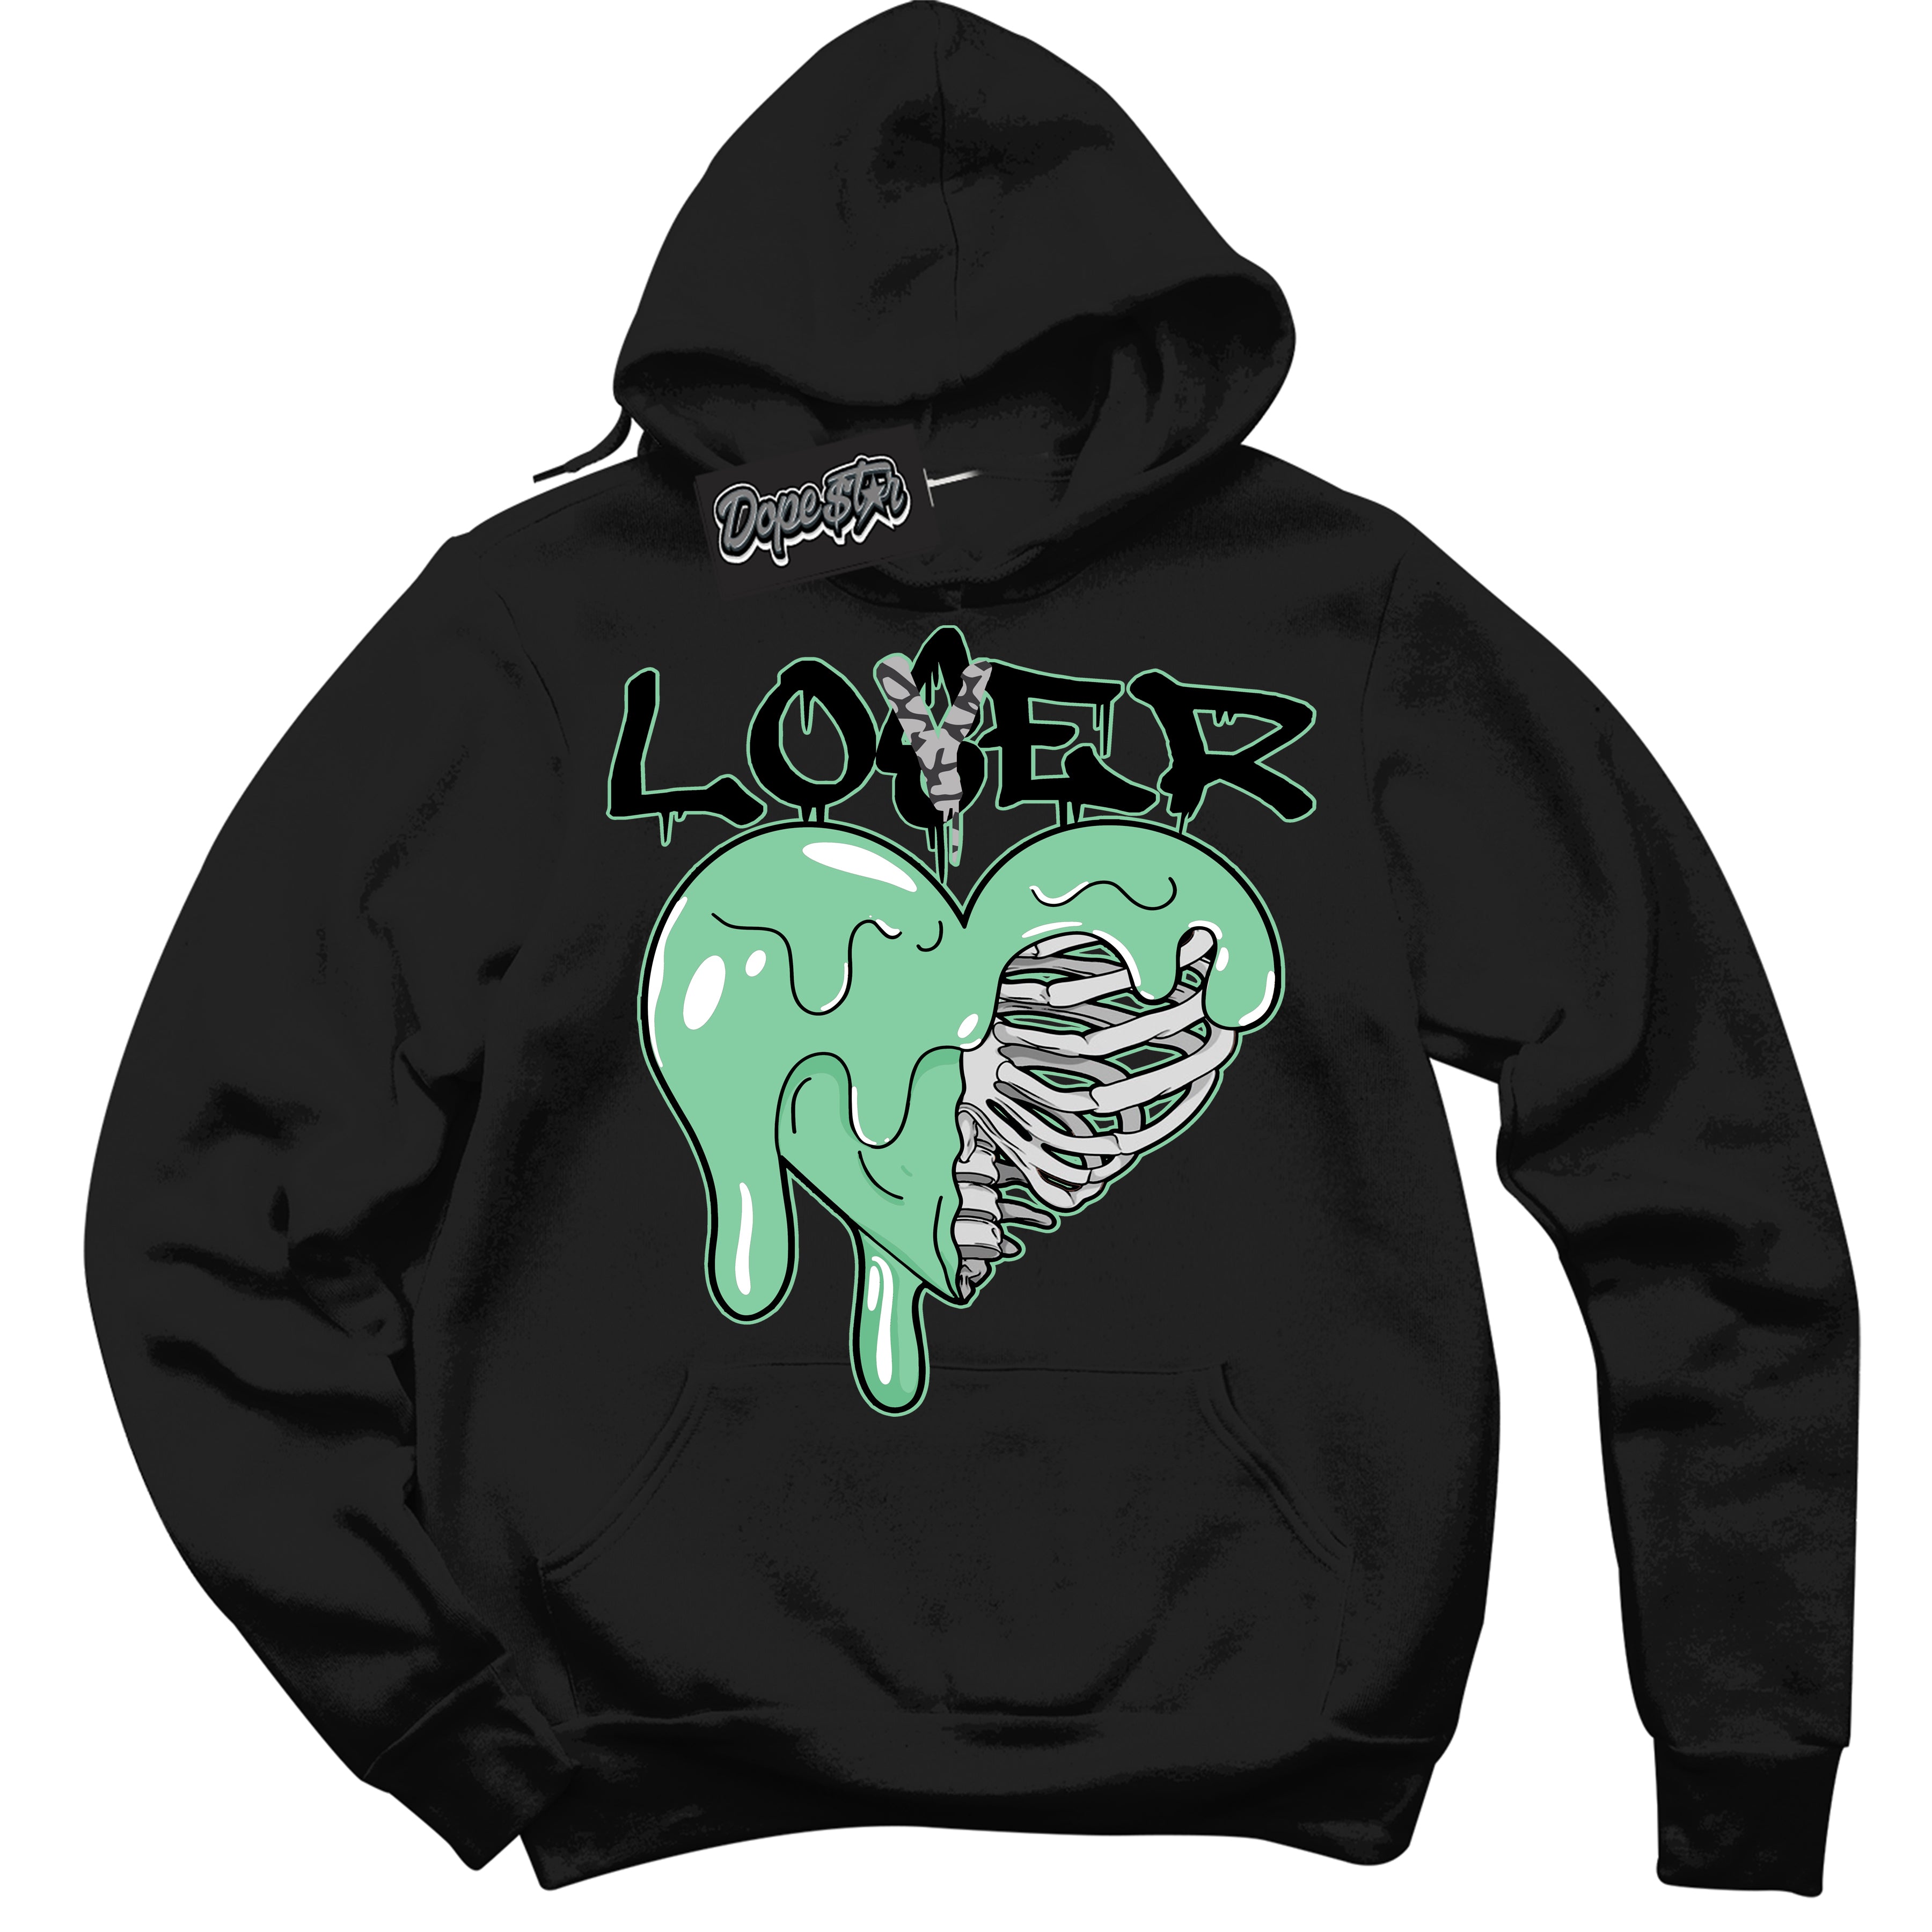 Cool Black Graphic DopeStar Hoodie with “ Lover Loser Heart “ print, that perfectly matches Green Glow 3S sneakers